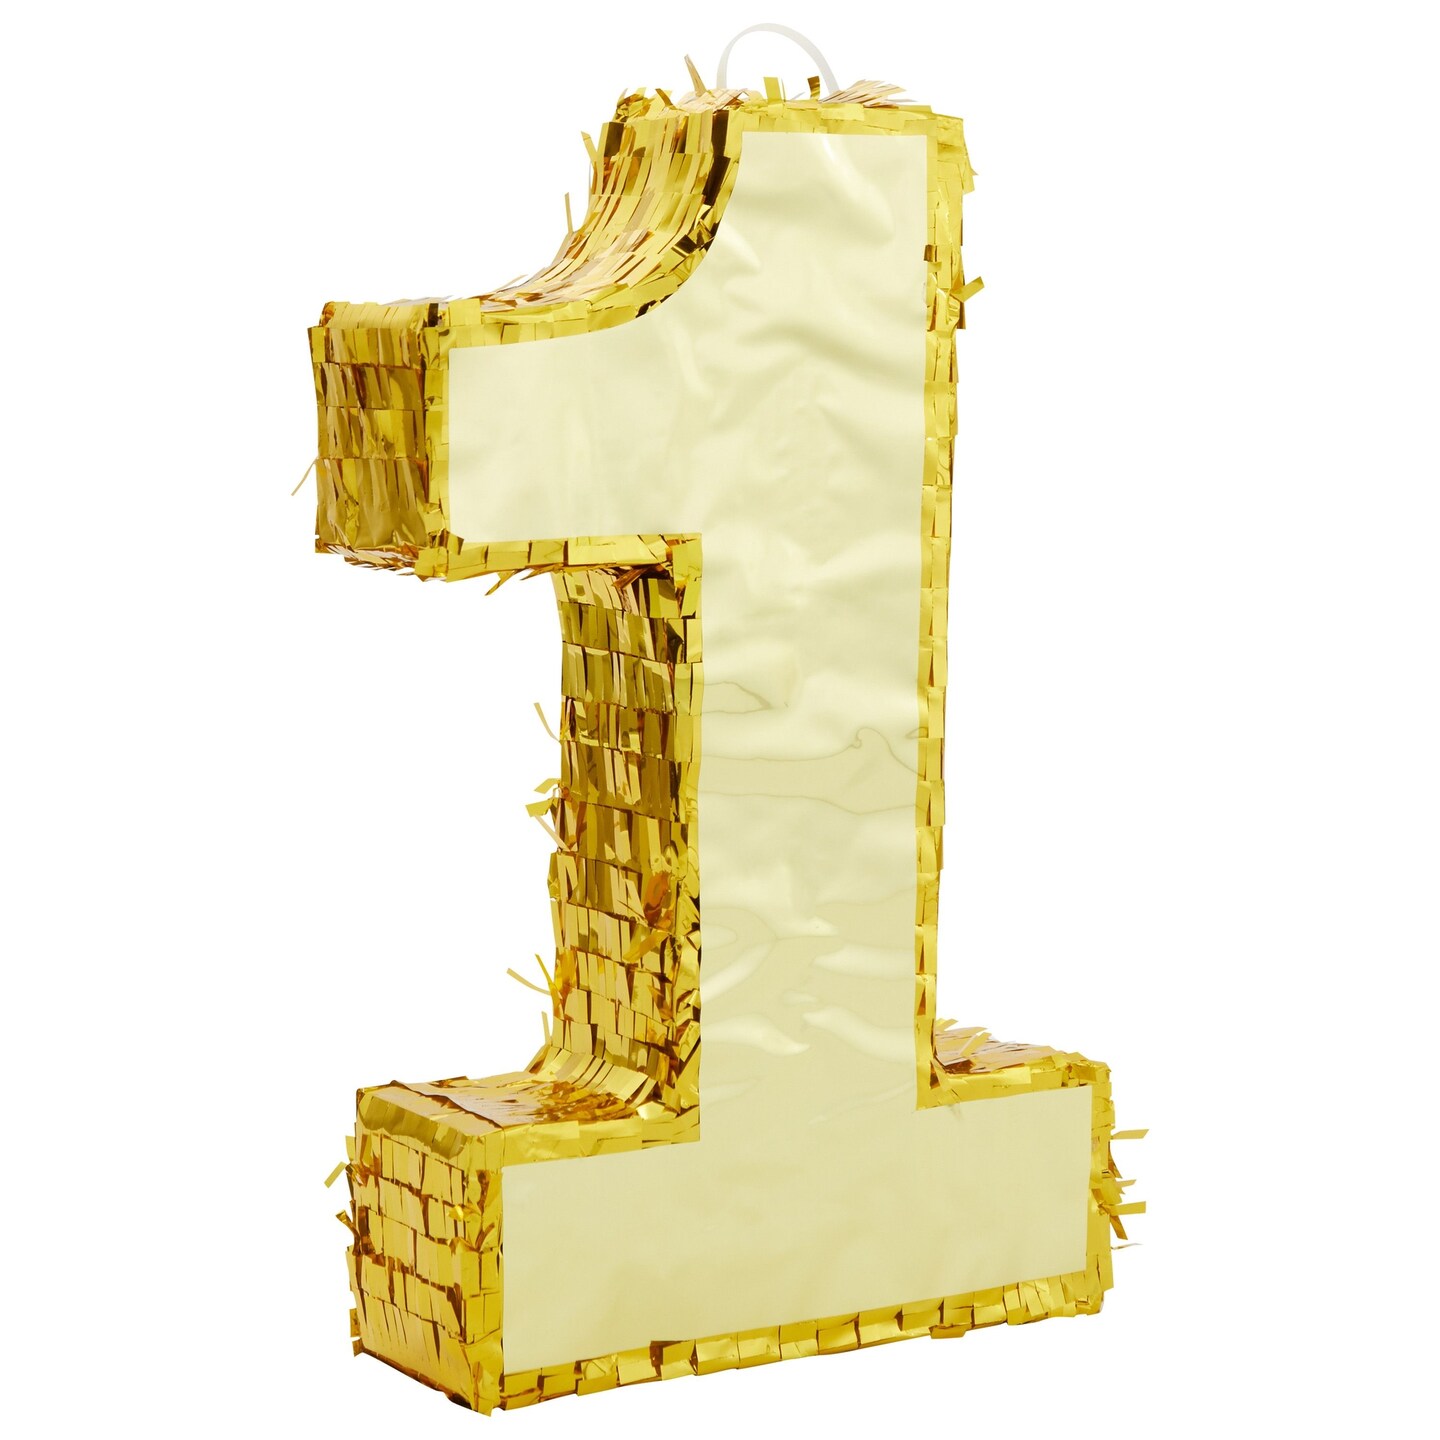 Gold Foil Number 1 Pinata for 1st Birthday Party Decorations, Centerpieces, Anniversary Celebrations (Small, 16 x 3 x 10 In)